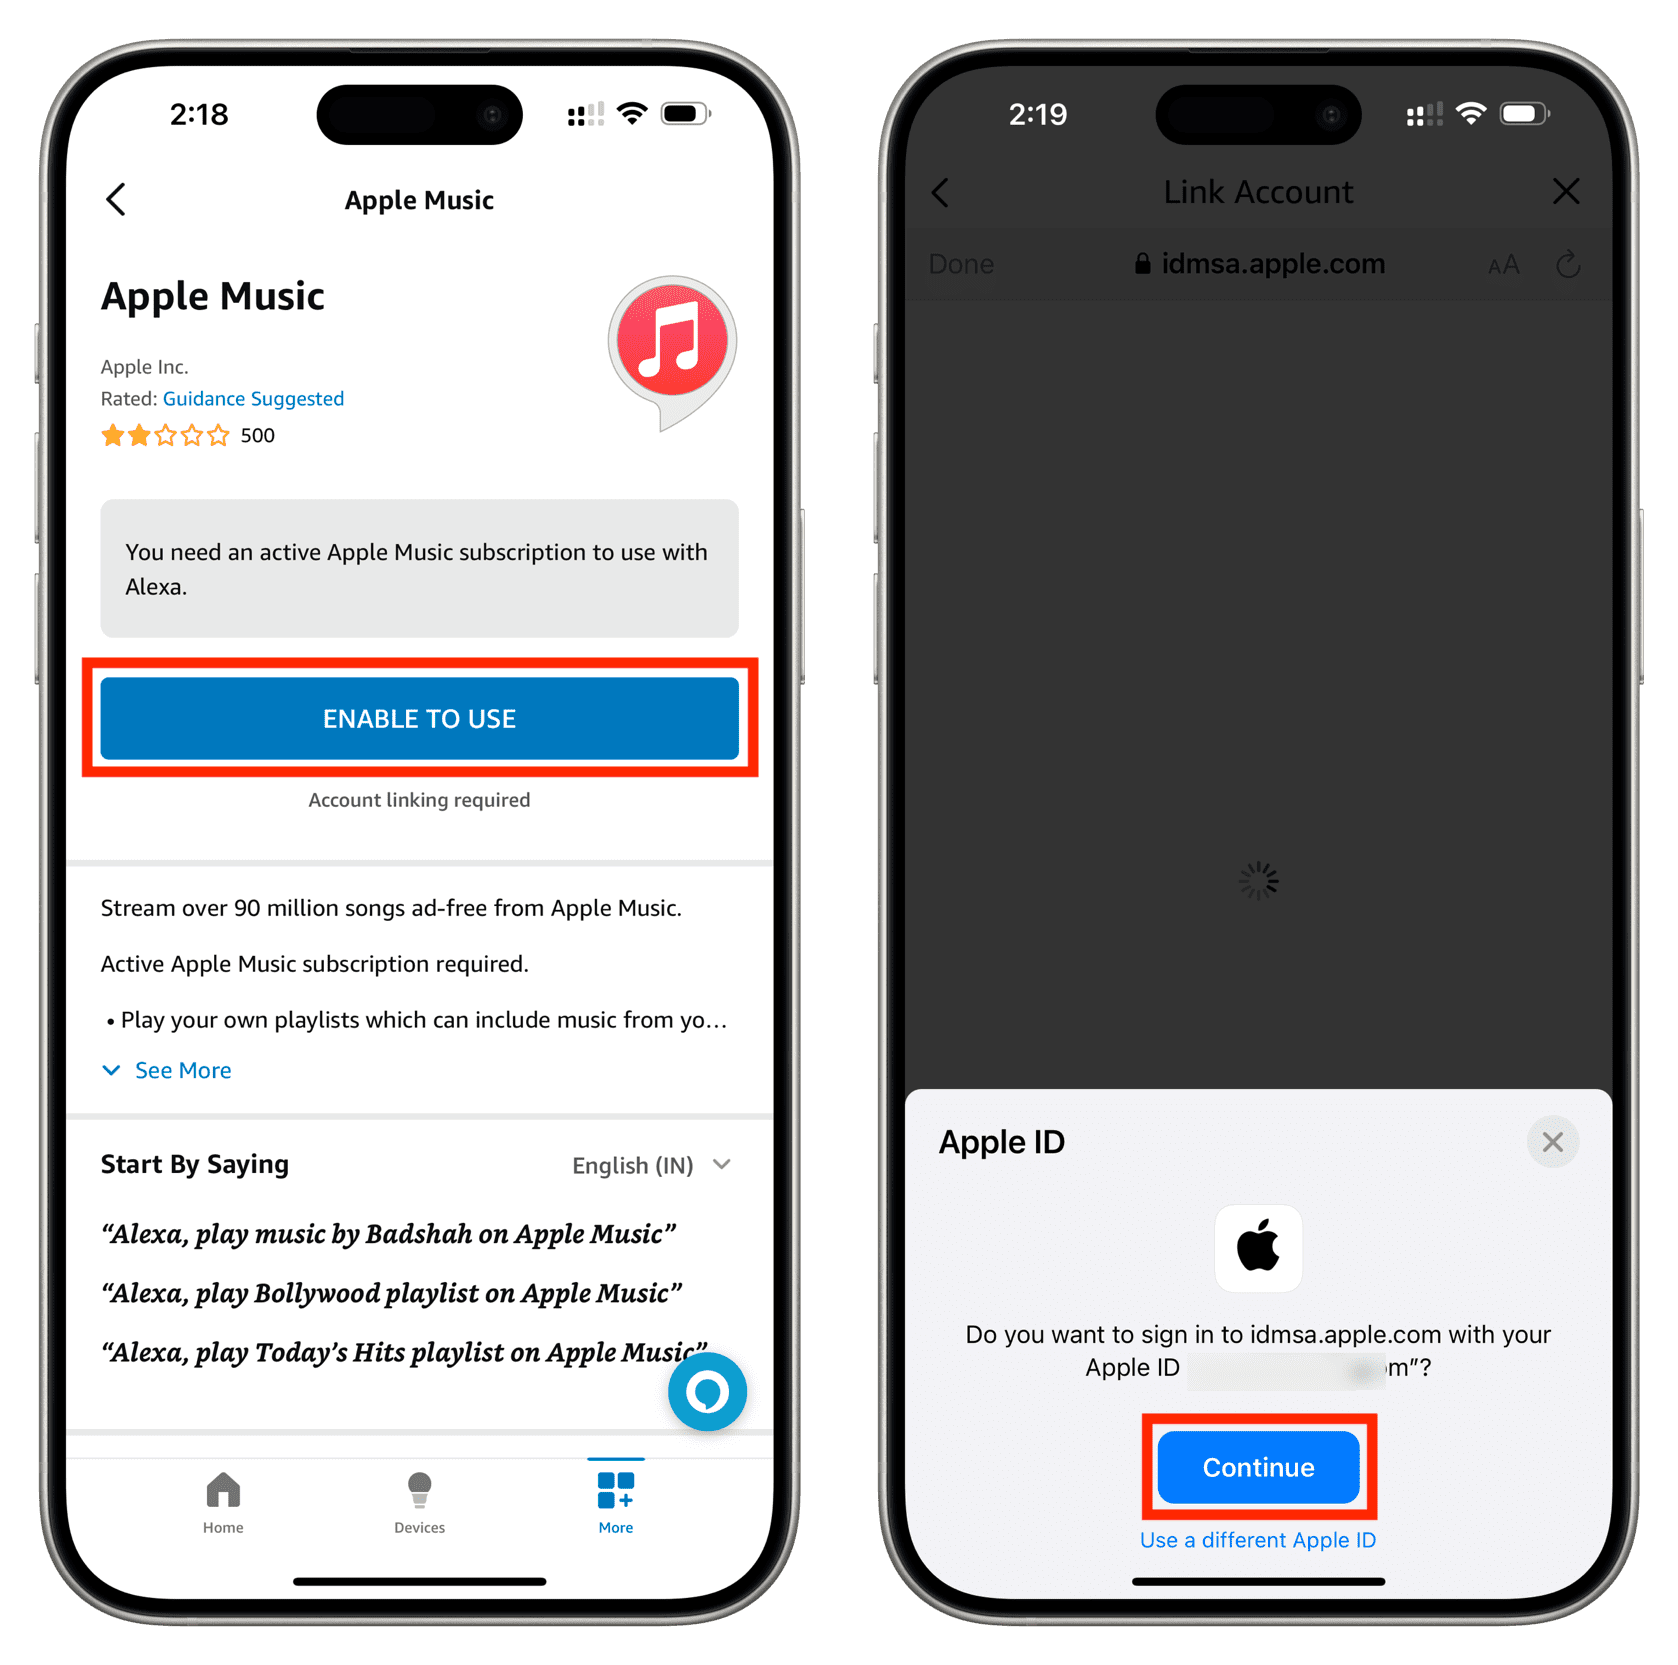 Enable to Use Apple Music with Alexa and sign in with Apple ID